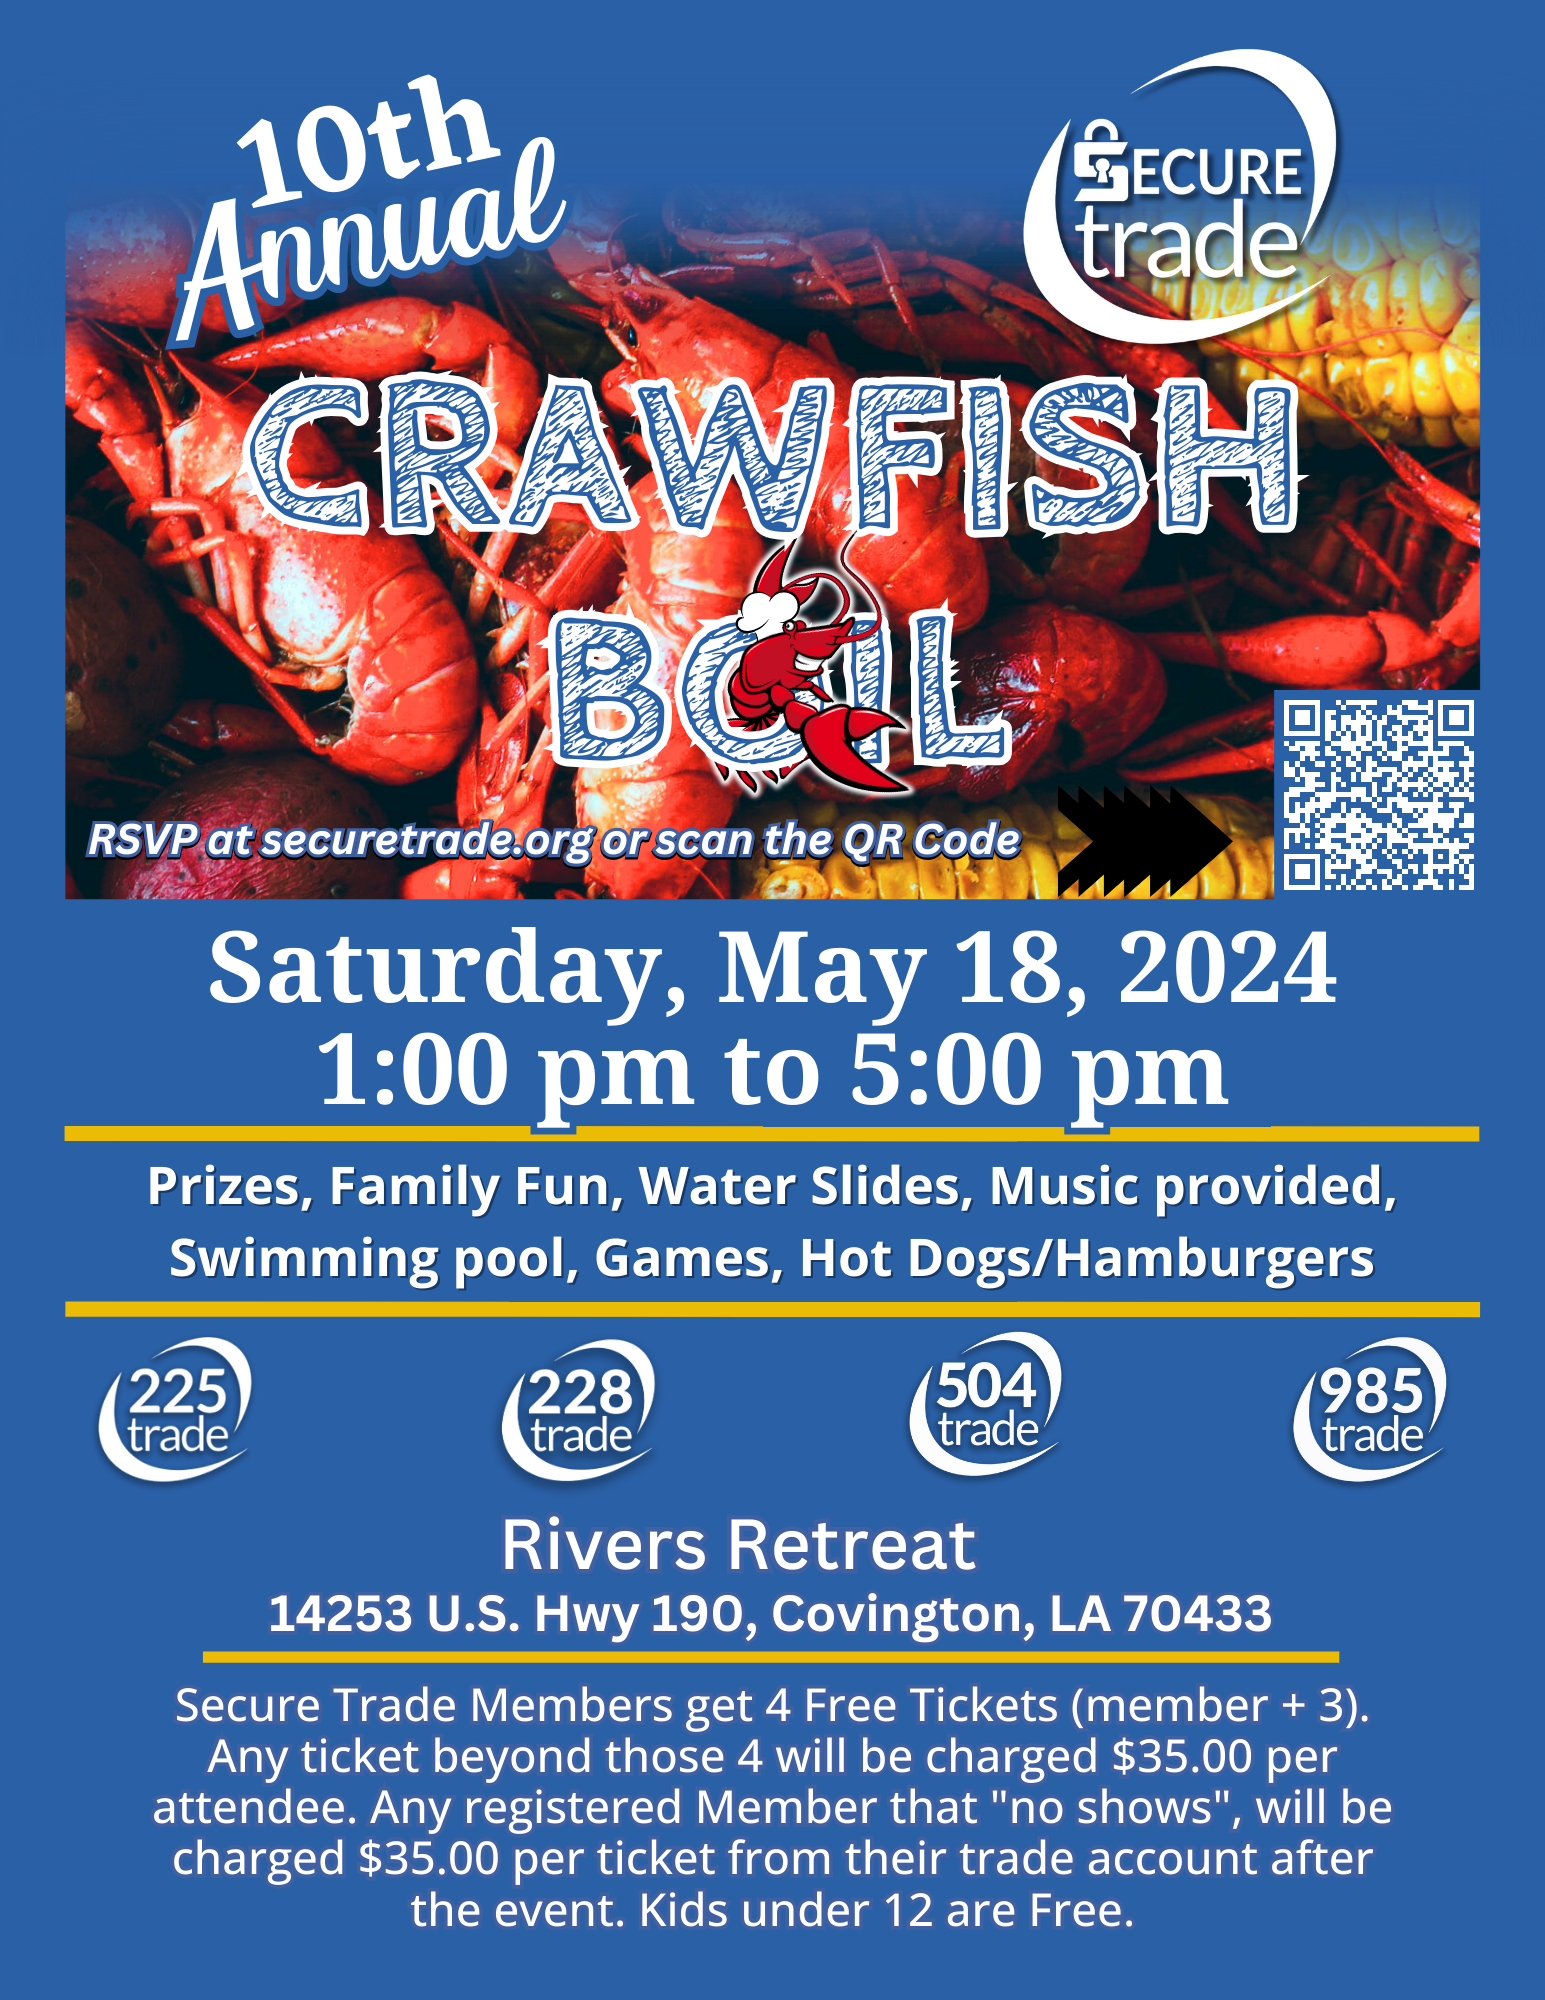 Secure Trade 10th Annual Crawfish